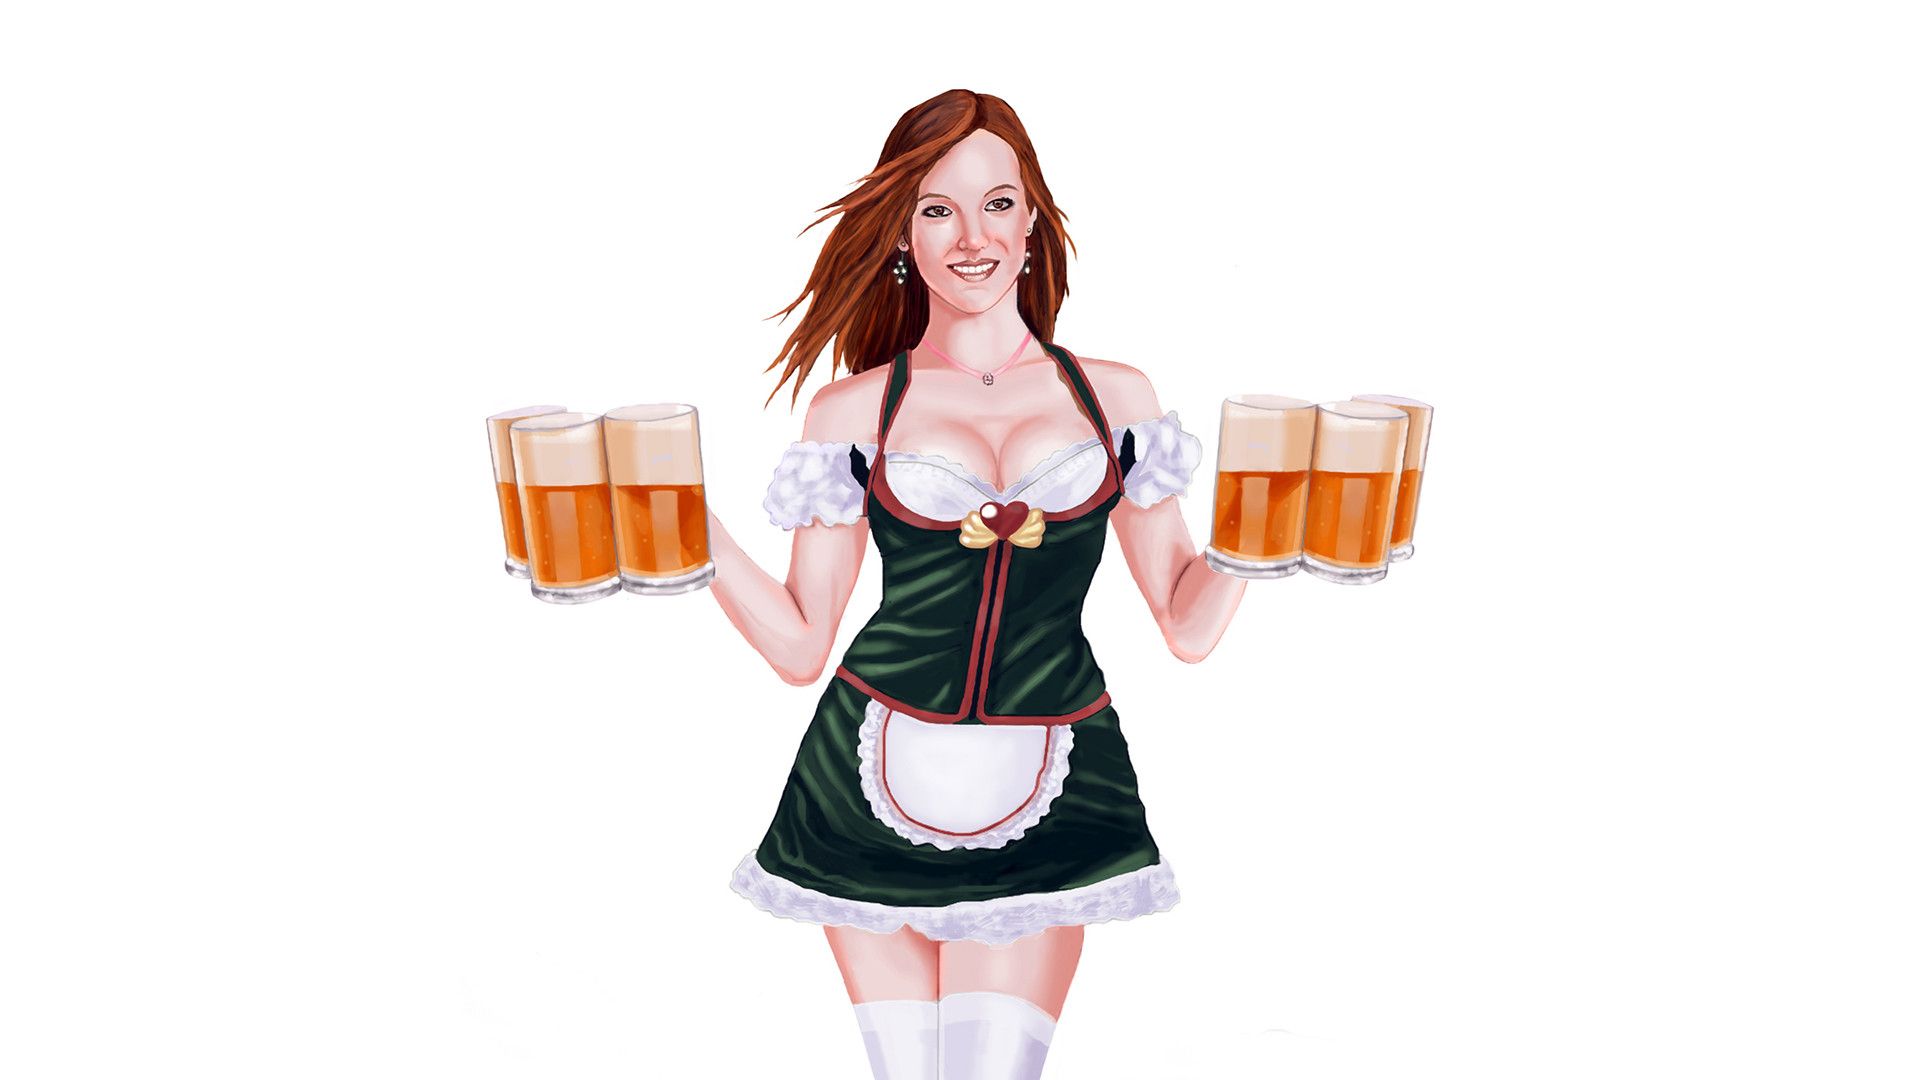 Wallpaper, women, cleavage, dress, artwork, beer, drinking glass, alcohol, simple background, smiling 1920x1080